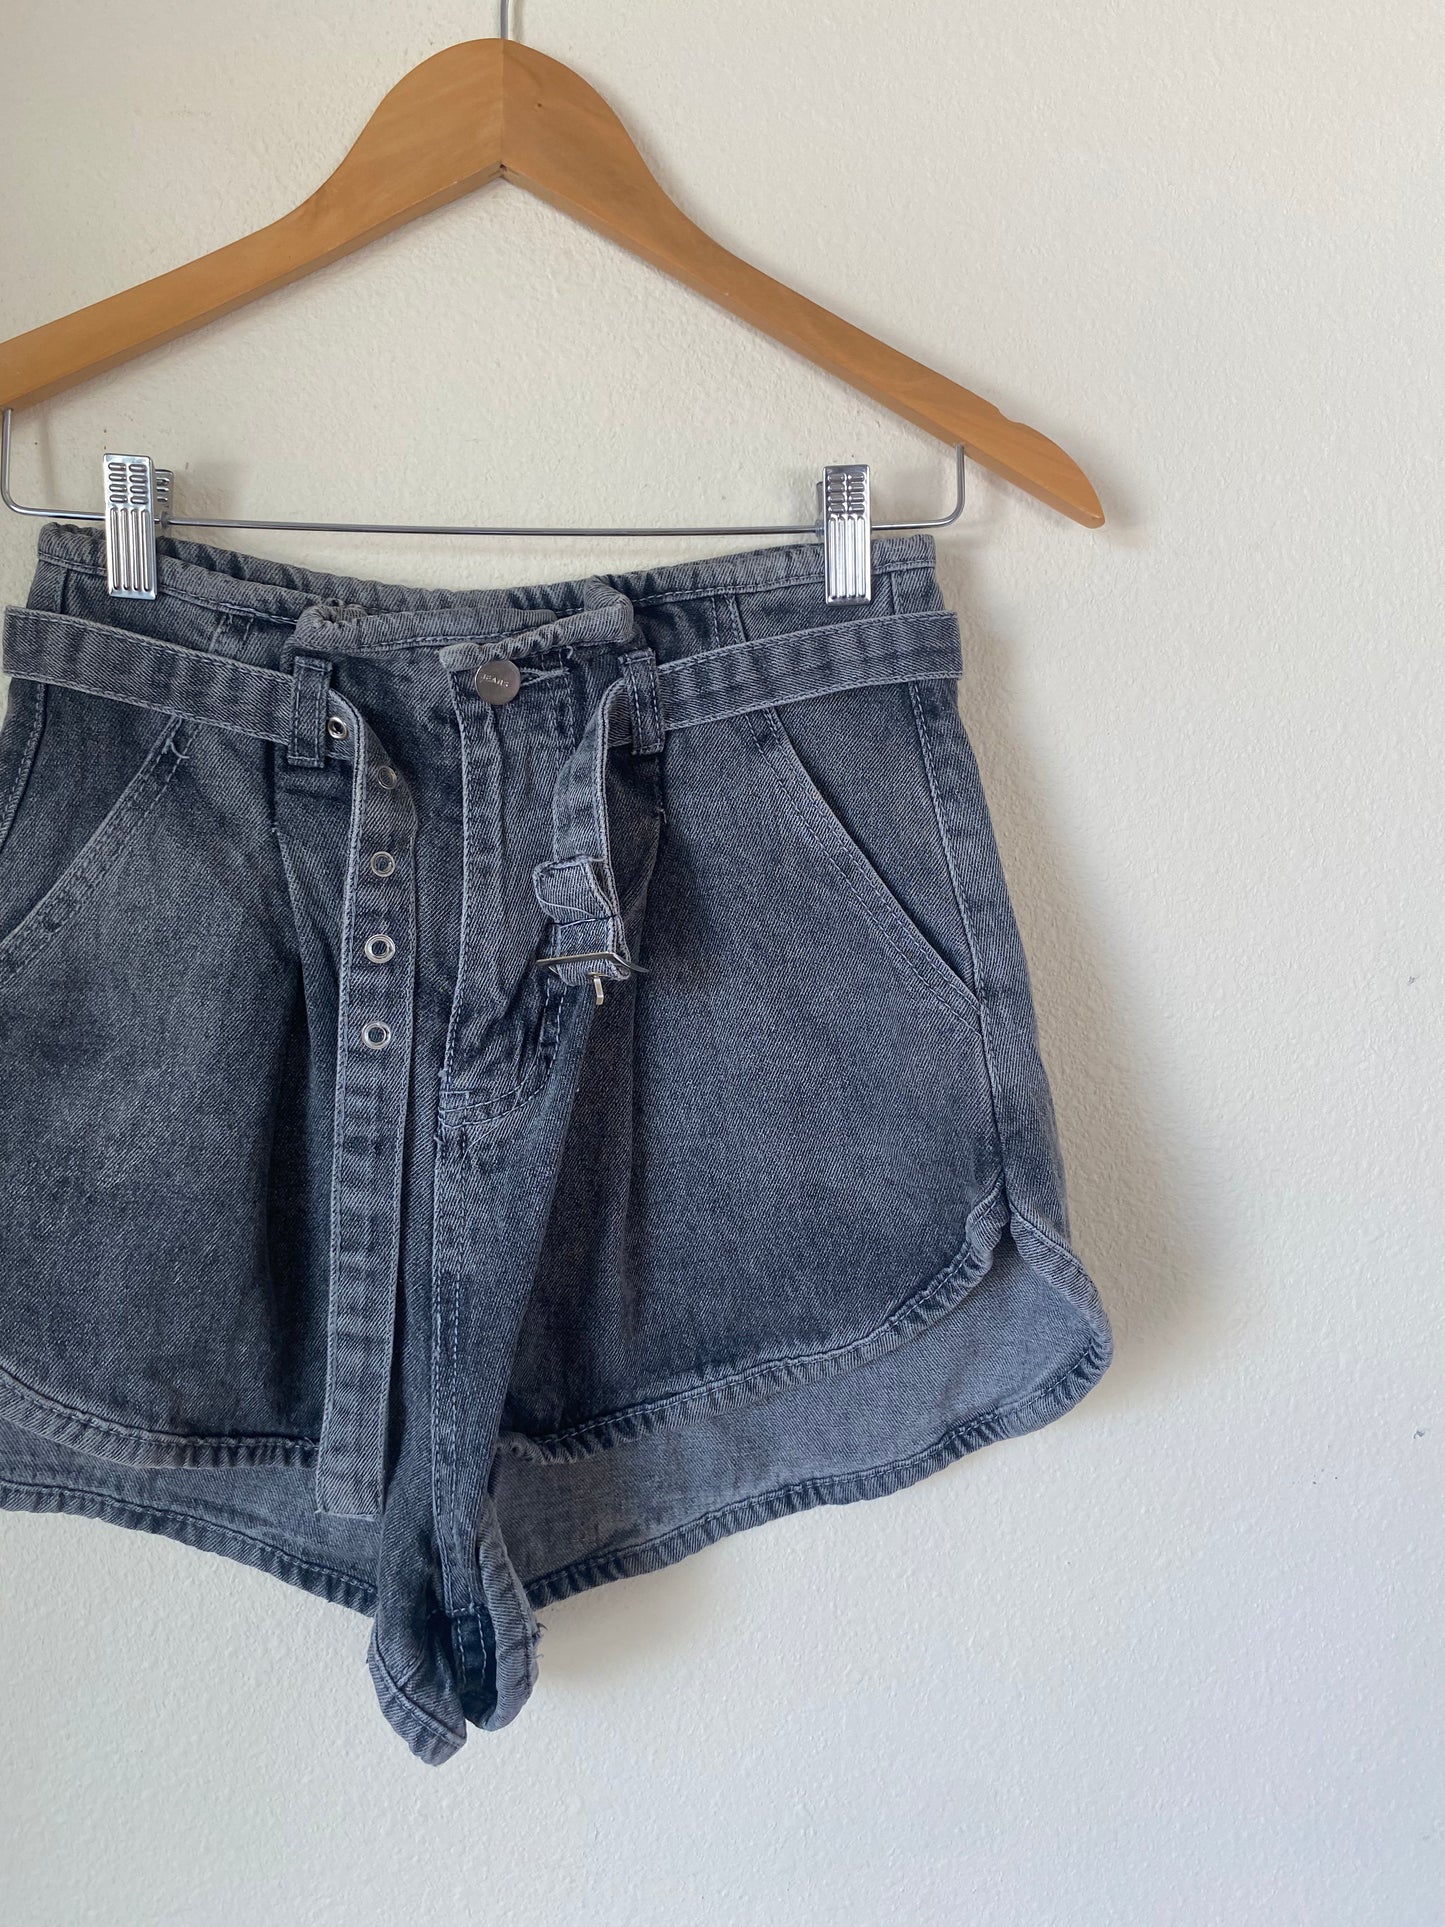 High Waisted Black Jean Belted Shorts SMALL